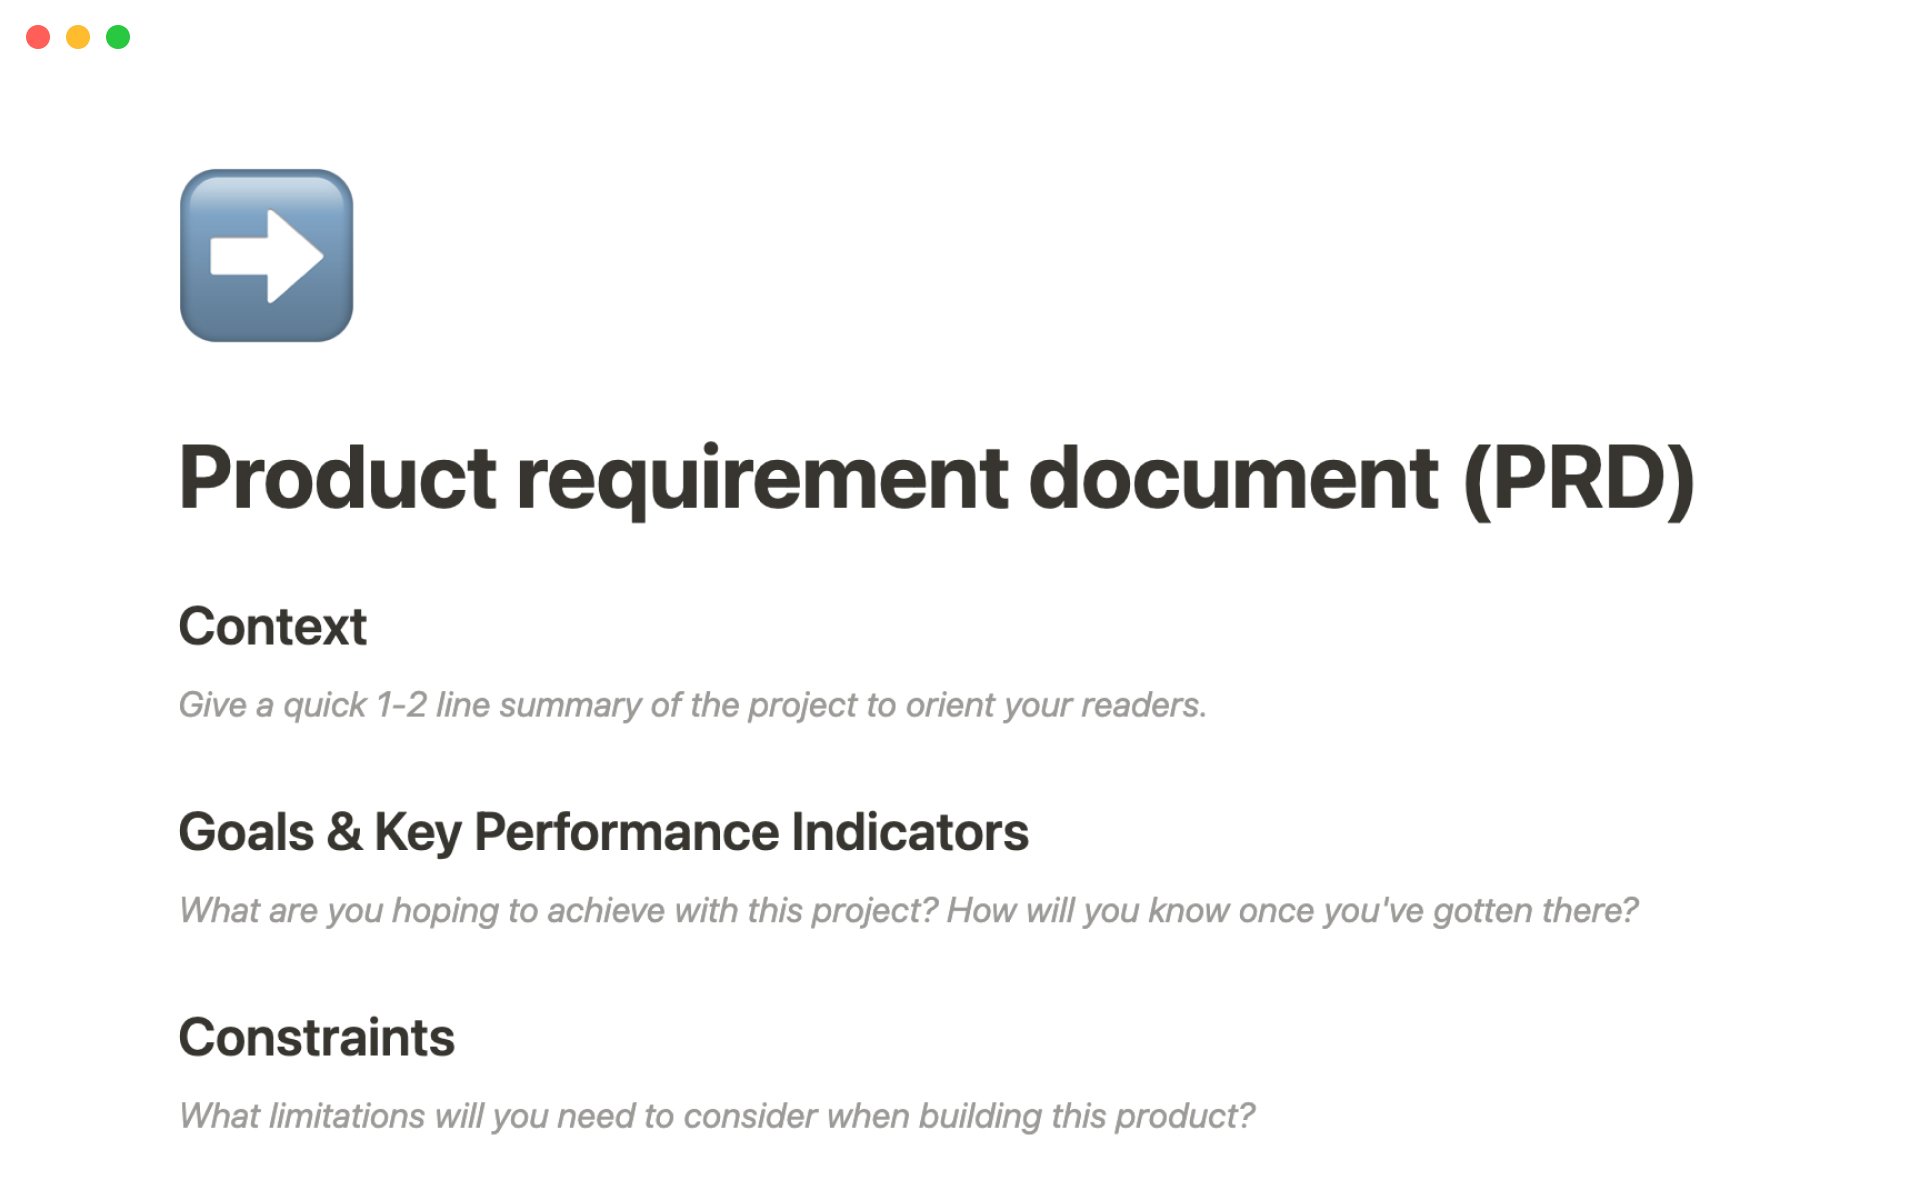 A product requirement document (PRD) helps you understand how users interact with your product.